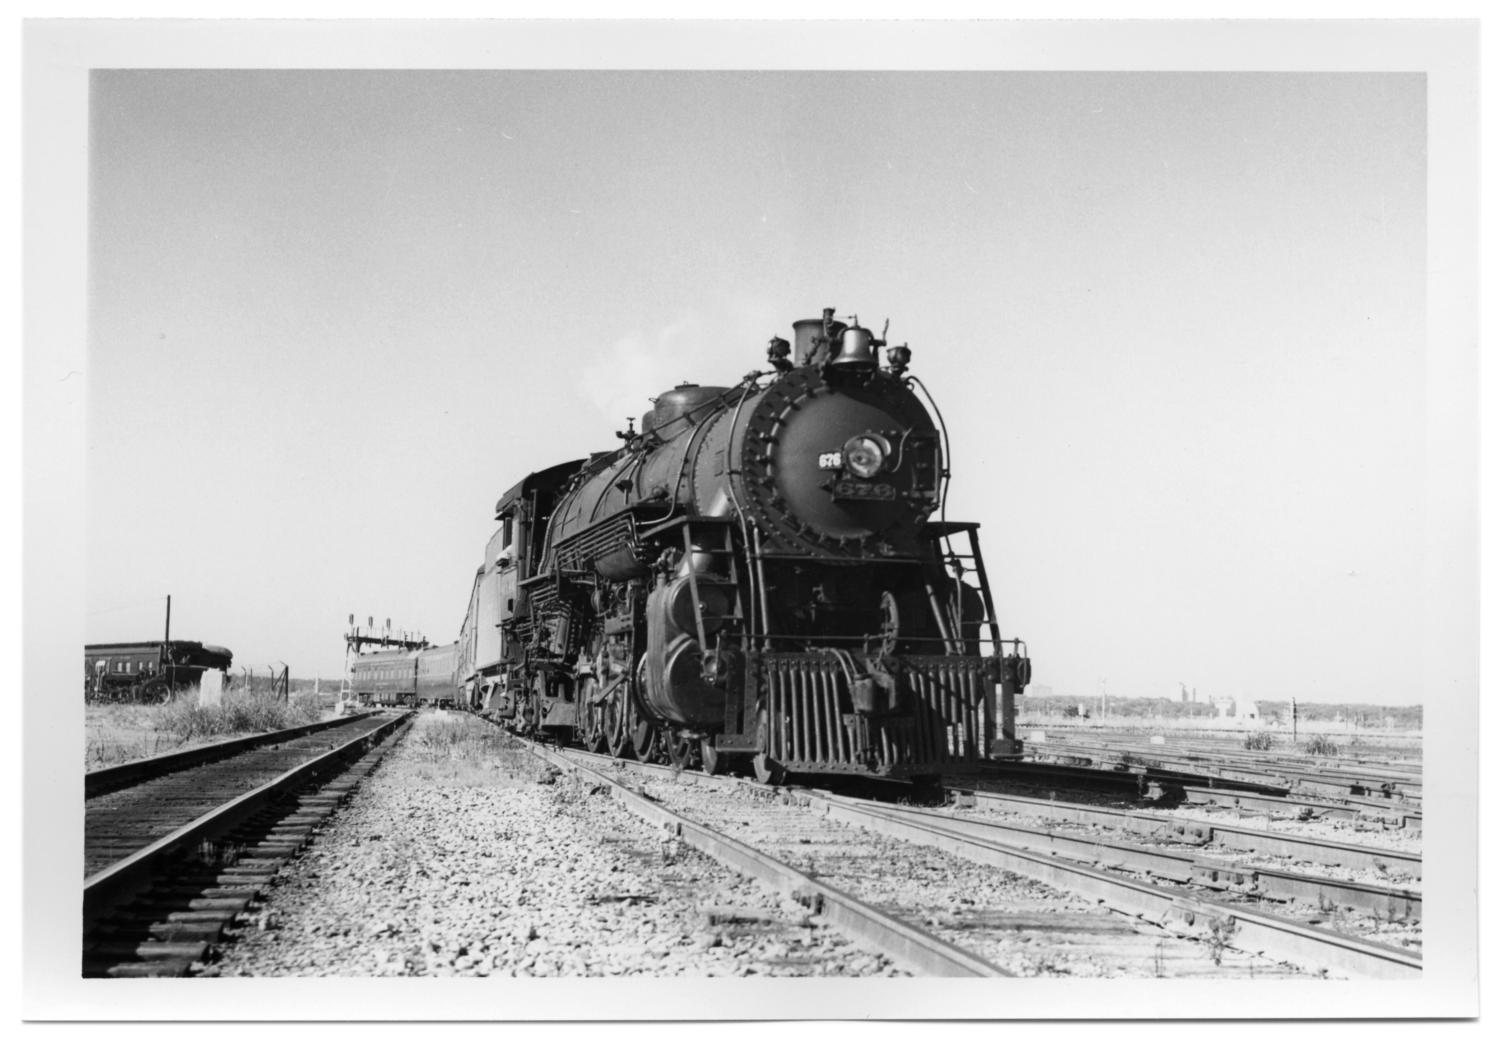 Morning Star a Cotton Belt train in Dallas] - The Portal to Texas History